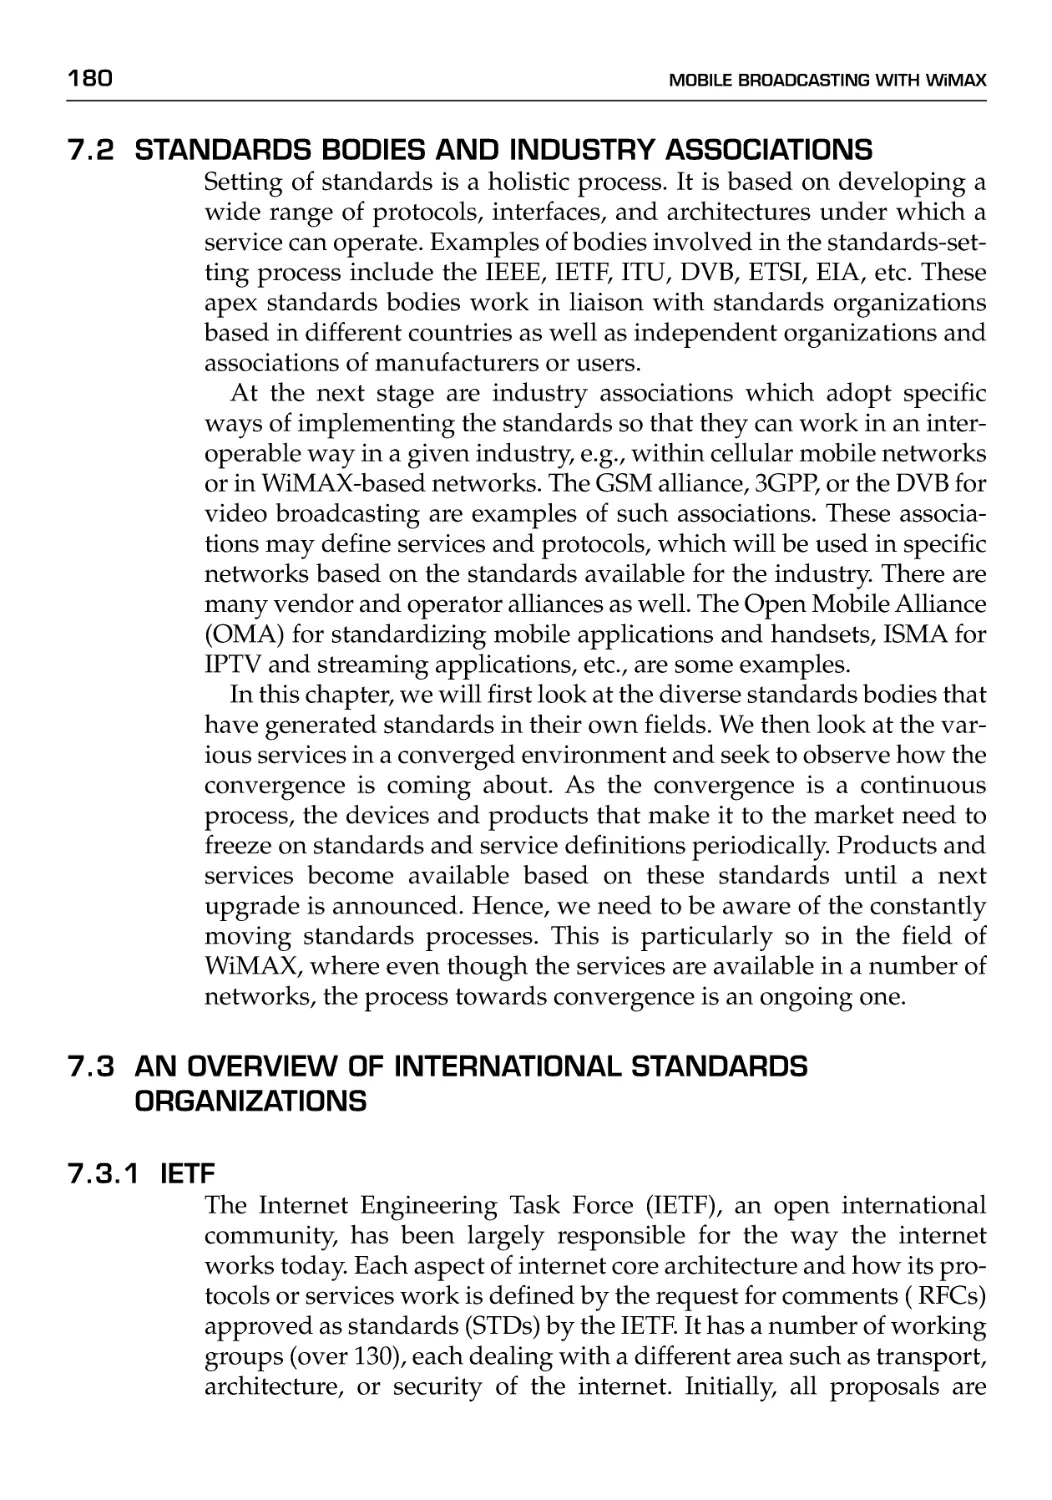 7.2 Standards Bodies and Industry Associations
7.3 An Overview of International Standards Organizations